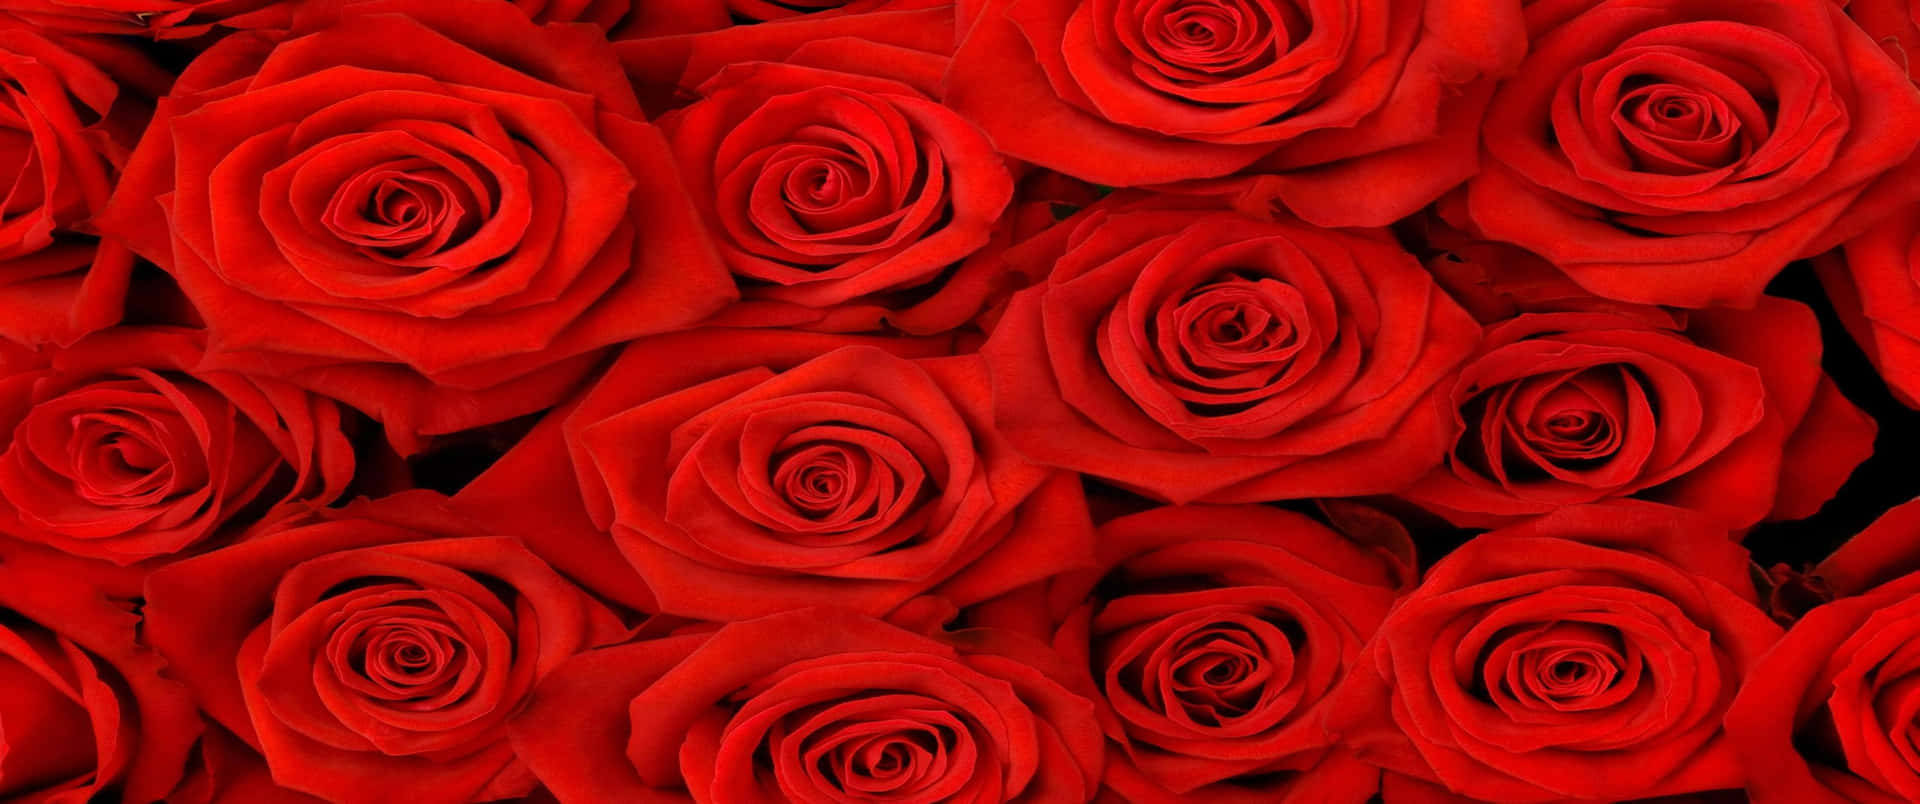 A beautiful display of roses in 3440x1440p